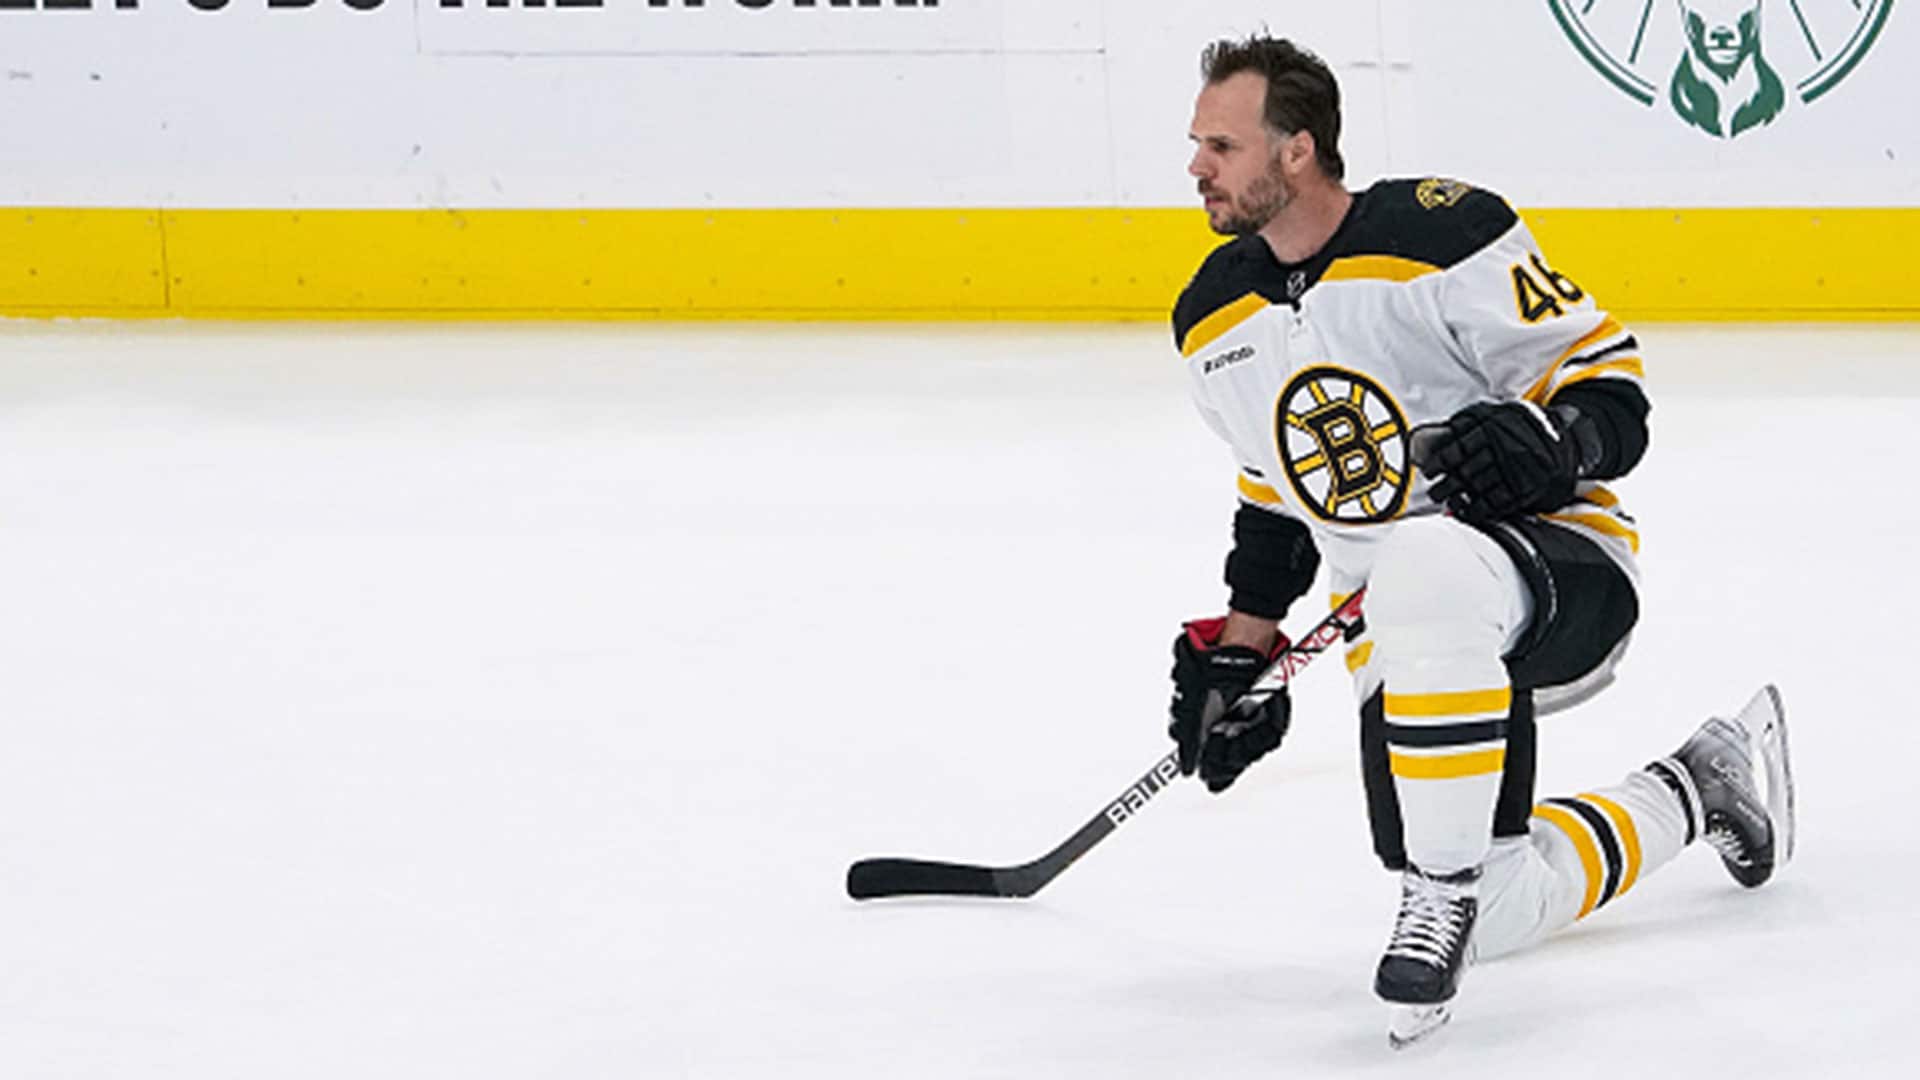 Bruins adding another veteran on professional tryout agreement